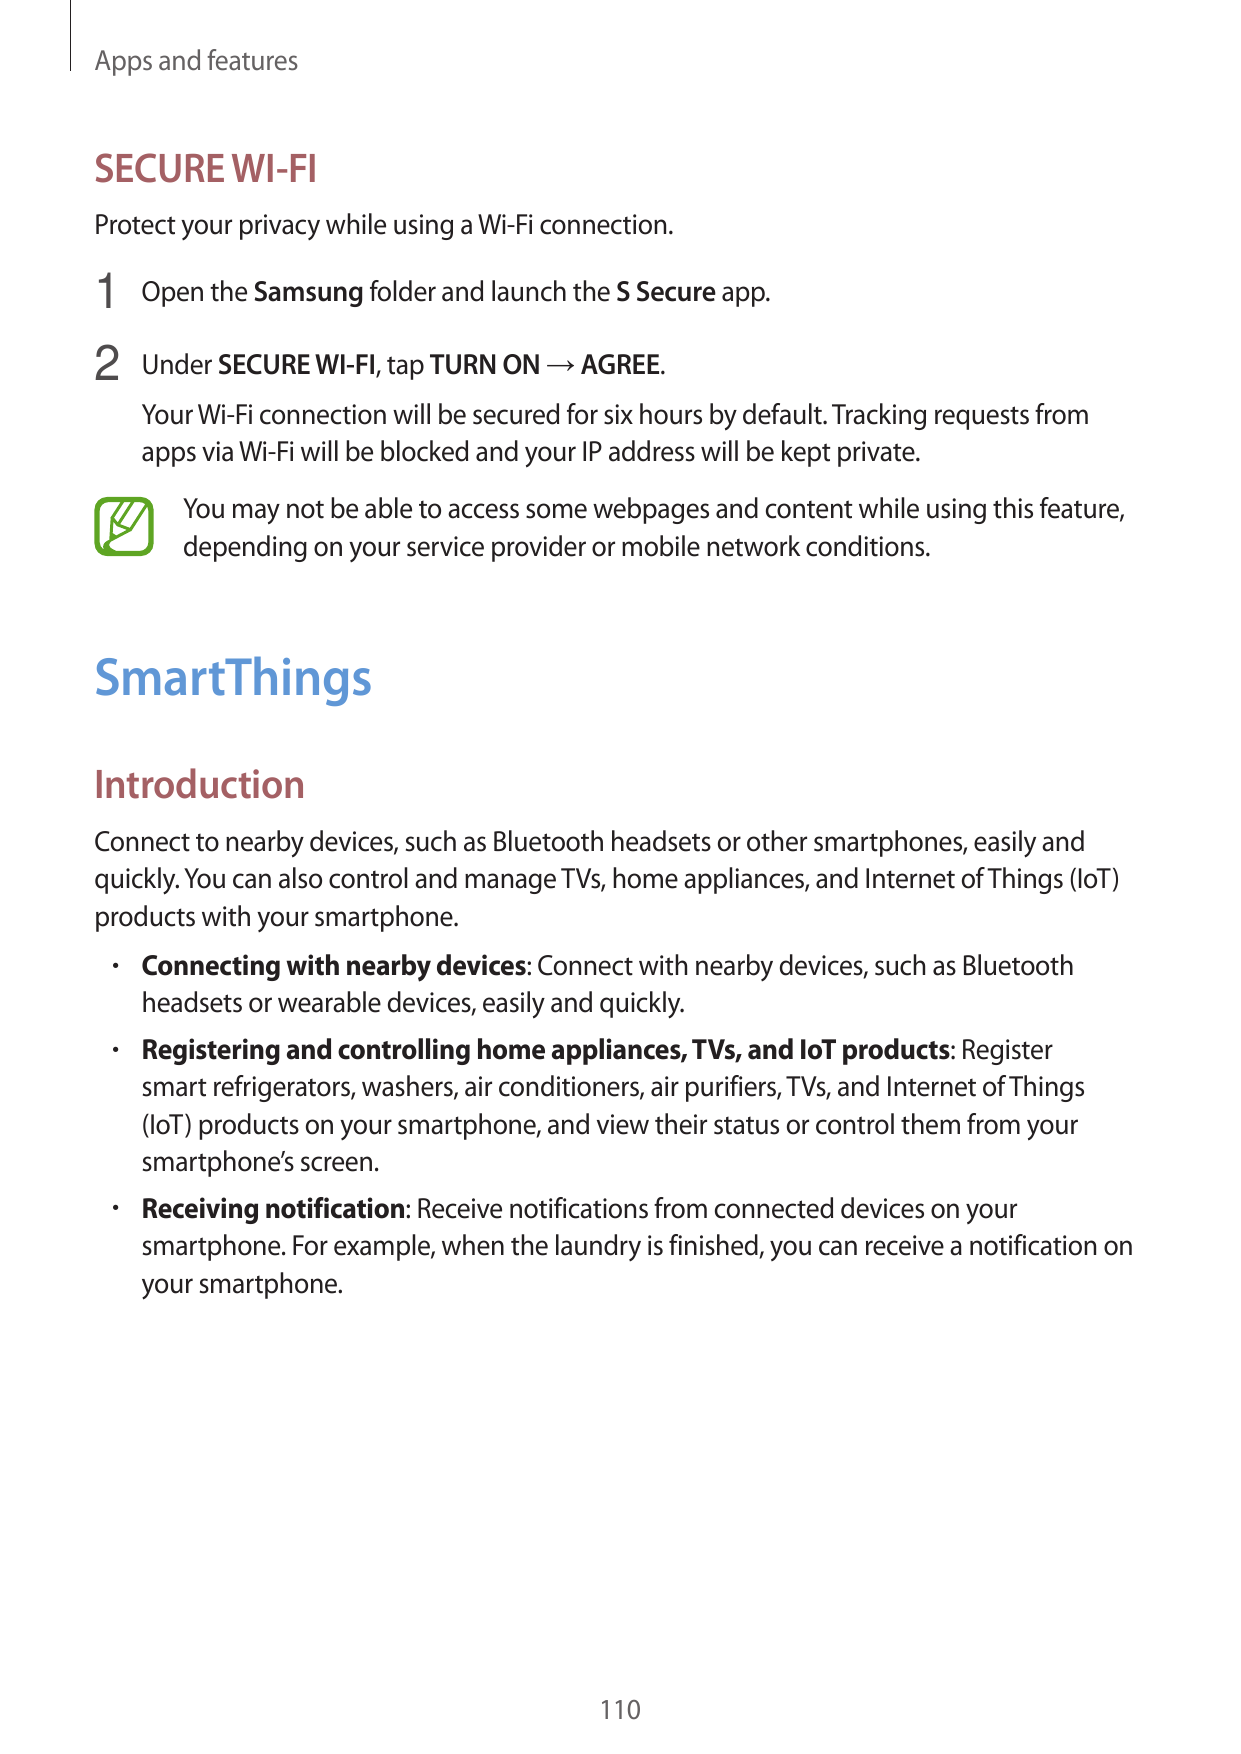 Apps and featuresSECURE WI-FIProtect your privacy while using a Wi-Fi connection.1 Open the Samsung folder and launch the S Secu